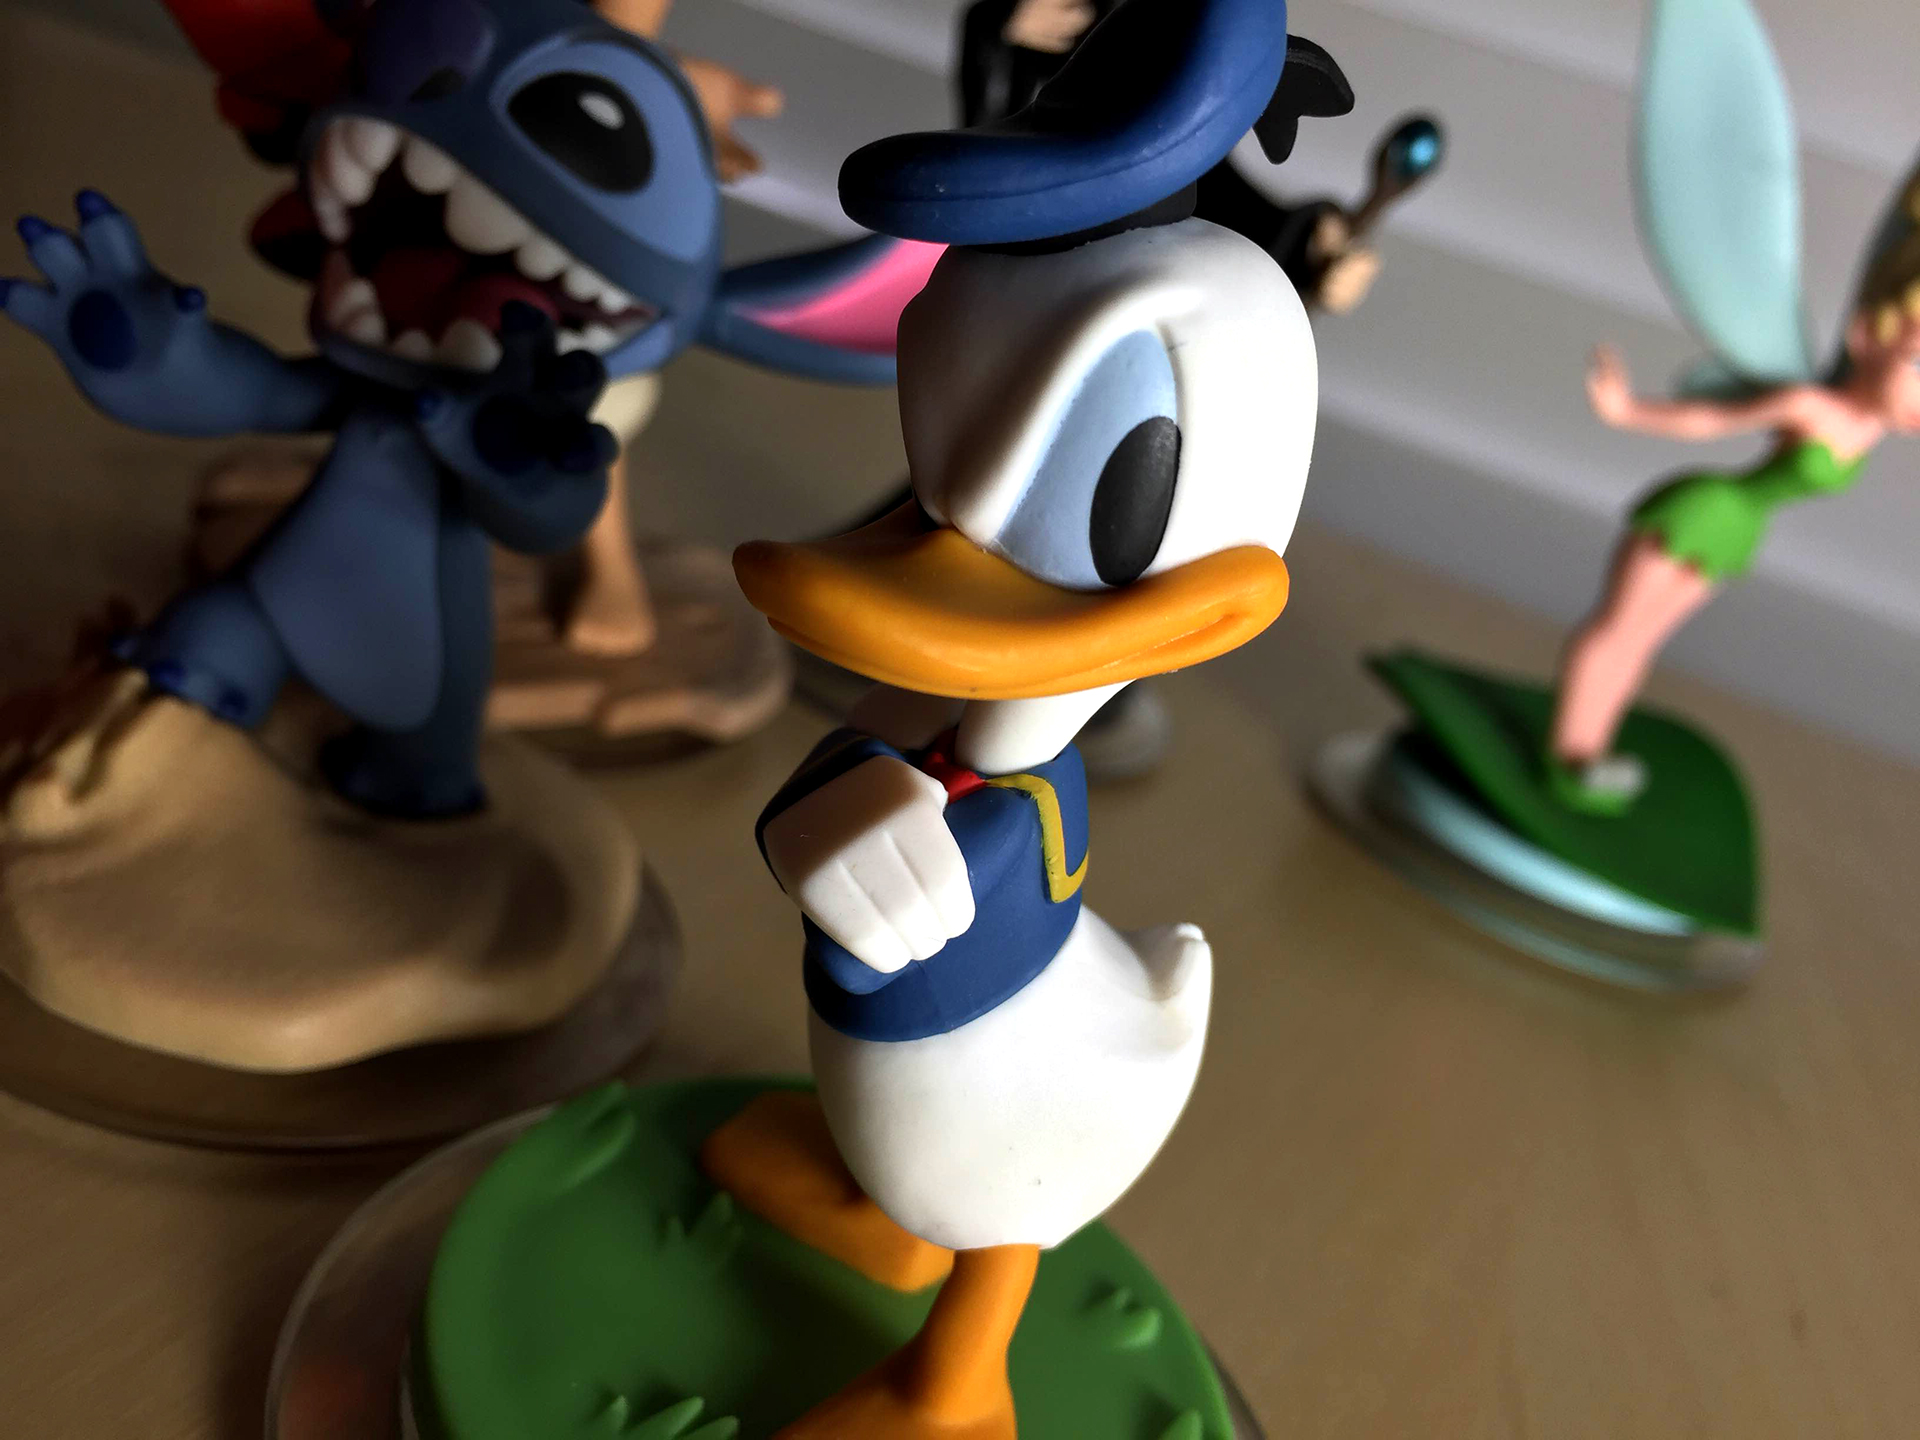 The Disney Proper Infinity 2.0 Figures Are Here, And They’re Lovely